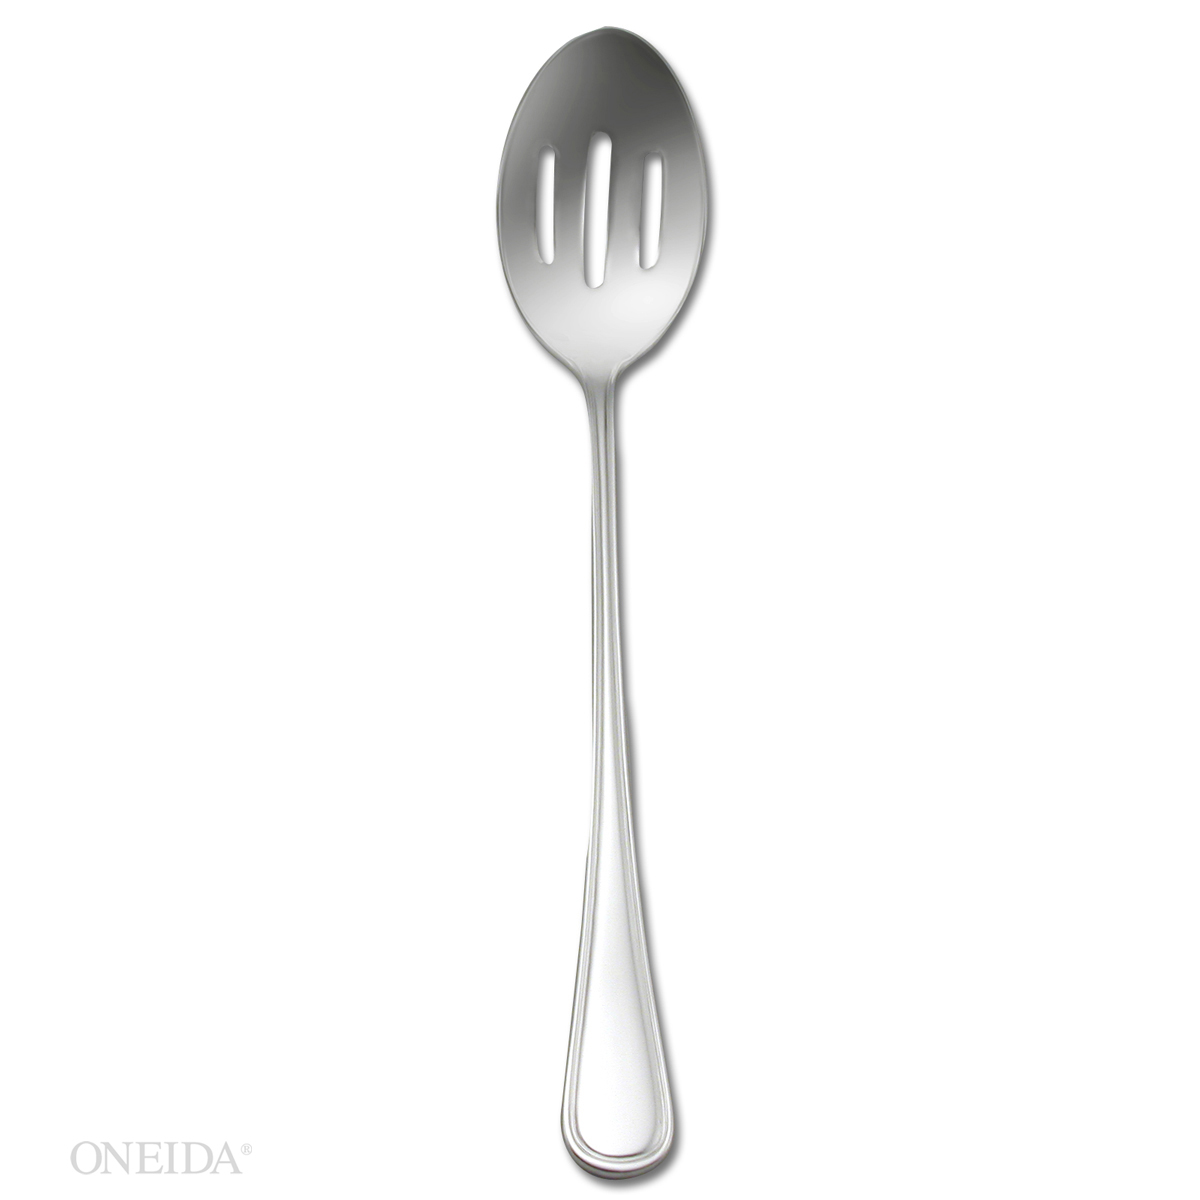 NEW RIM SLOTTED BANQUET SPOON